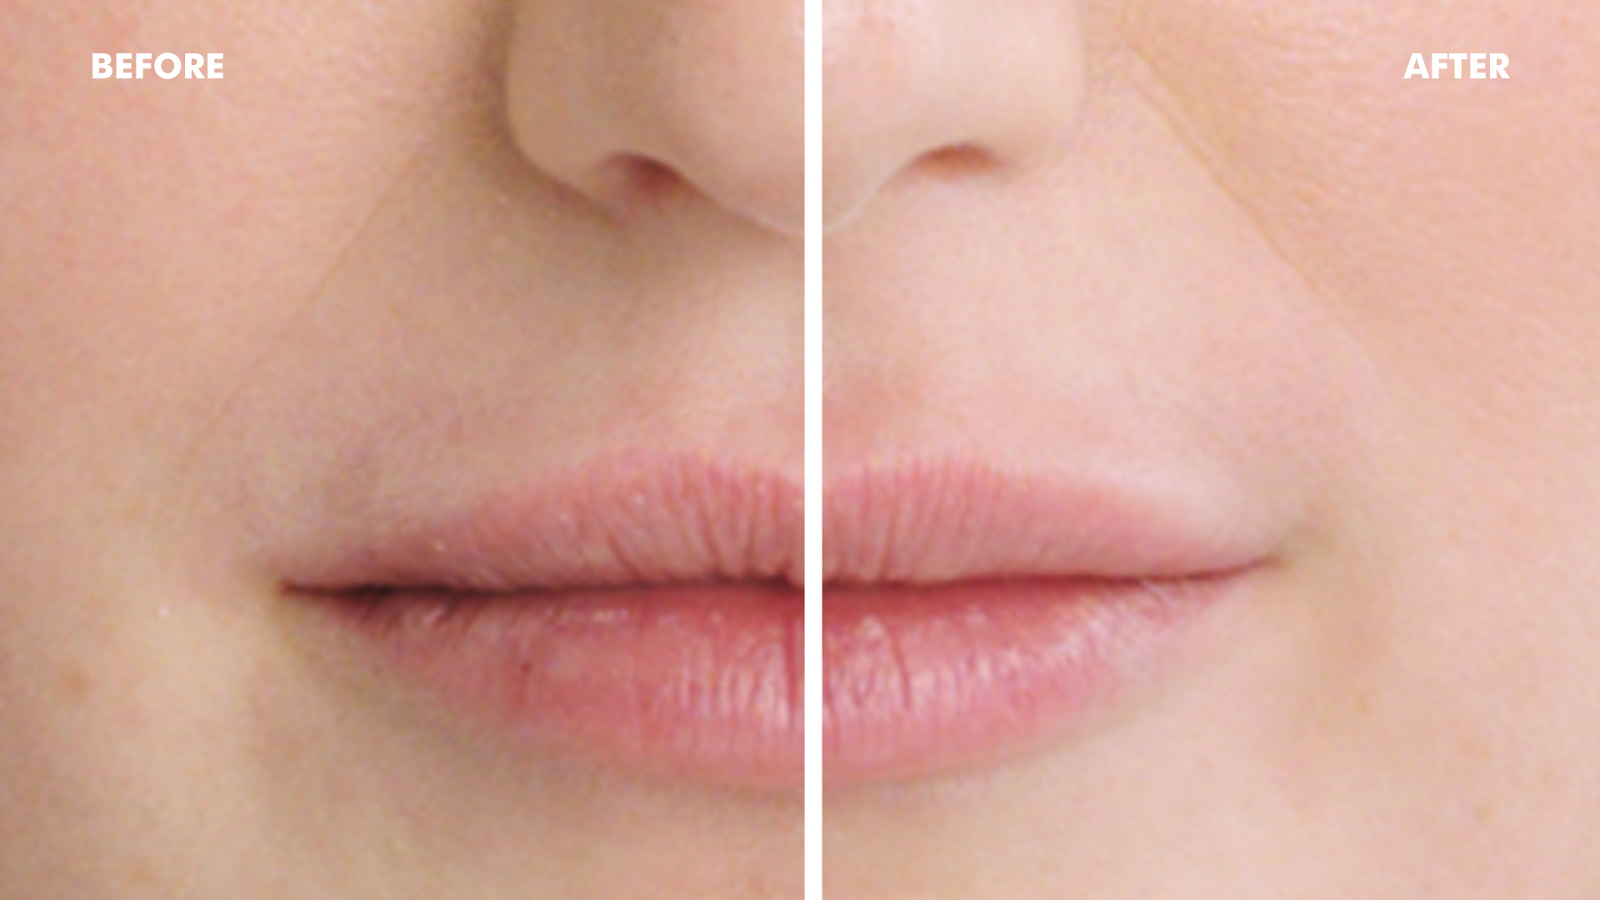 Lips before and after the treatment. 